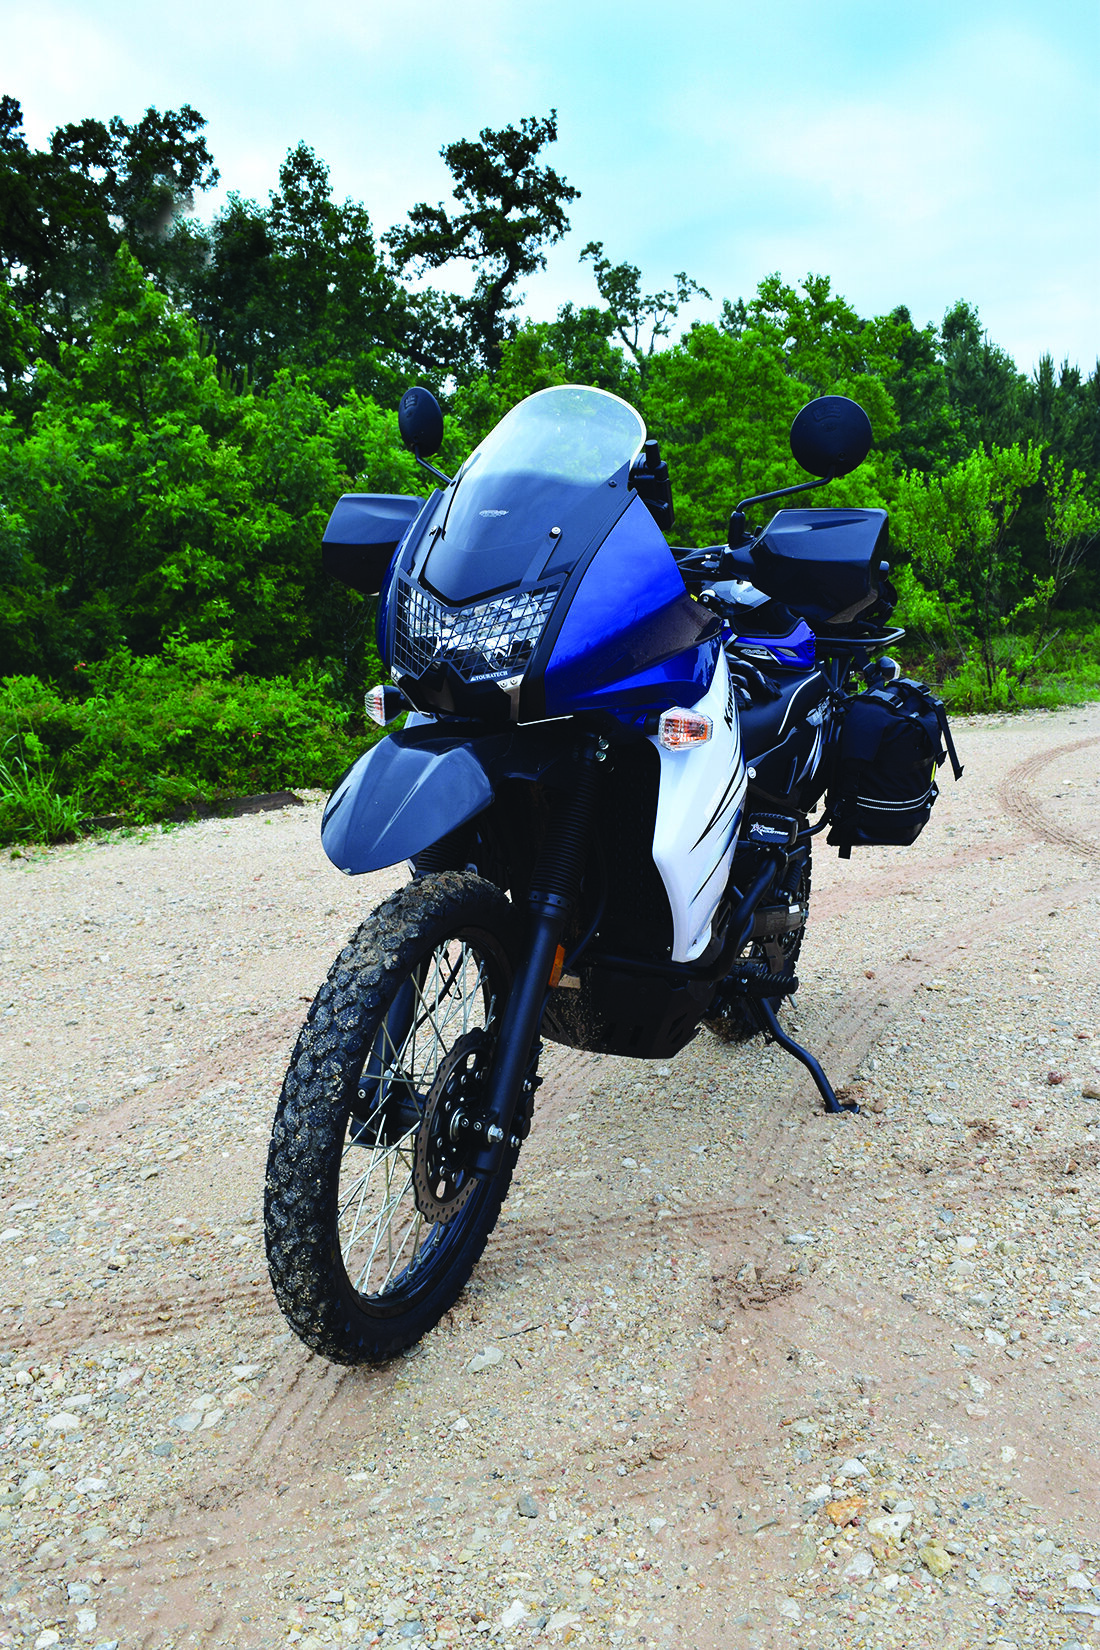 Front view of the KLR 650 1.jpg